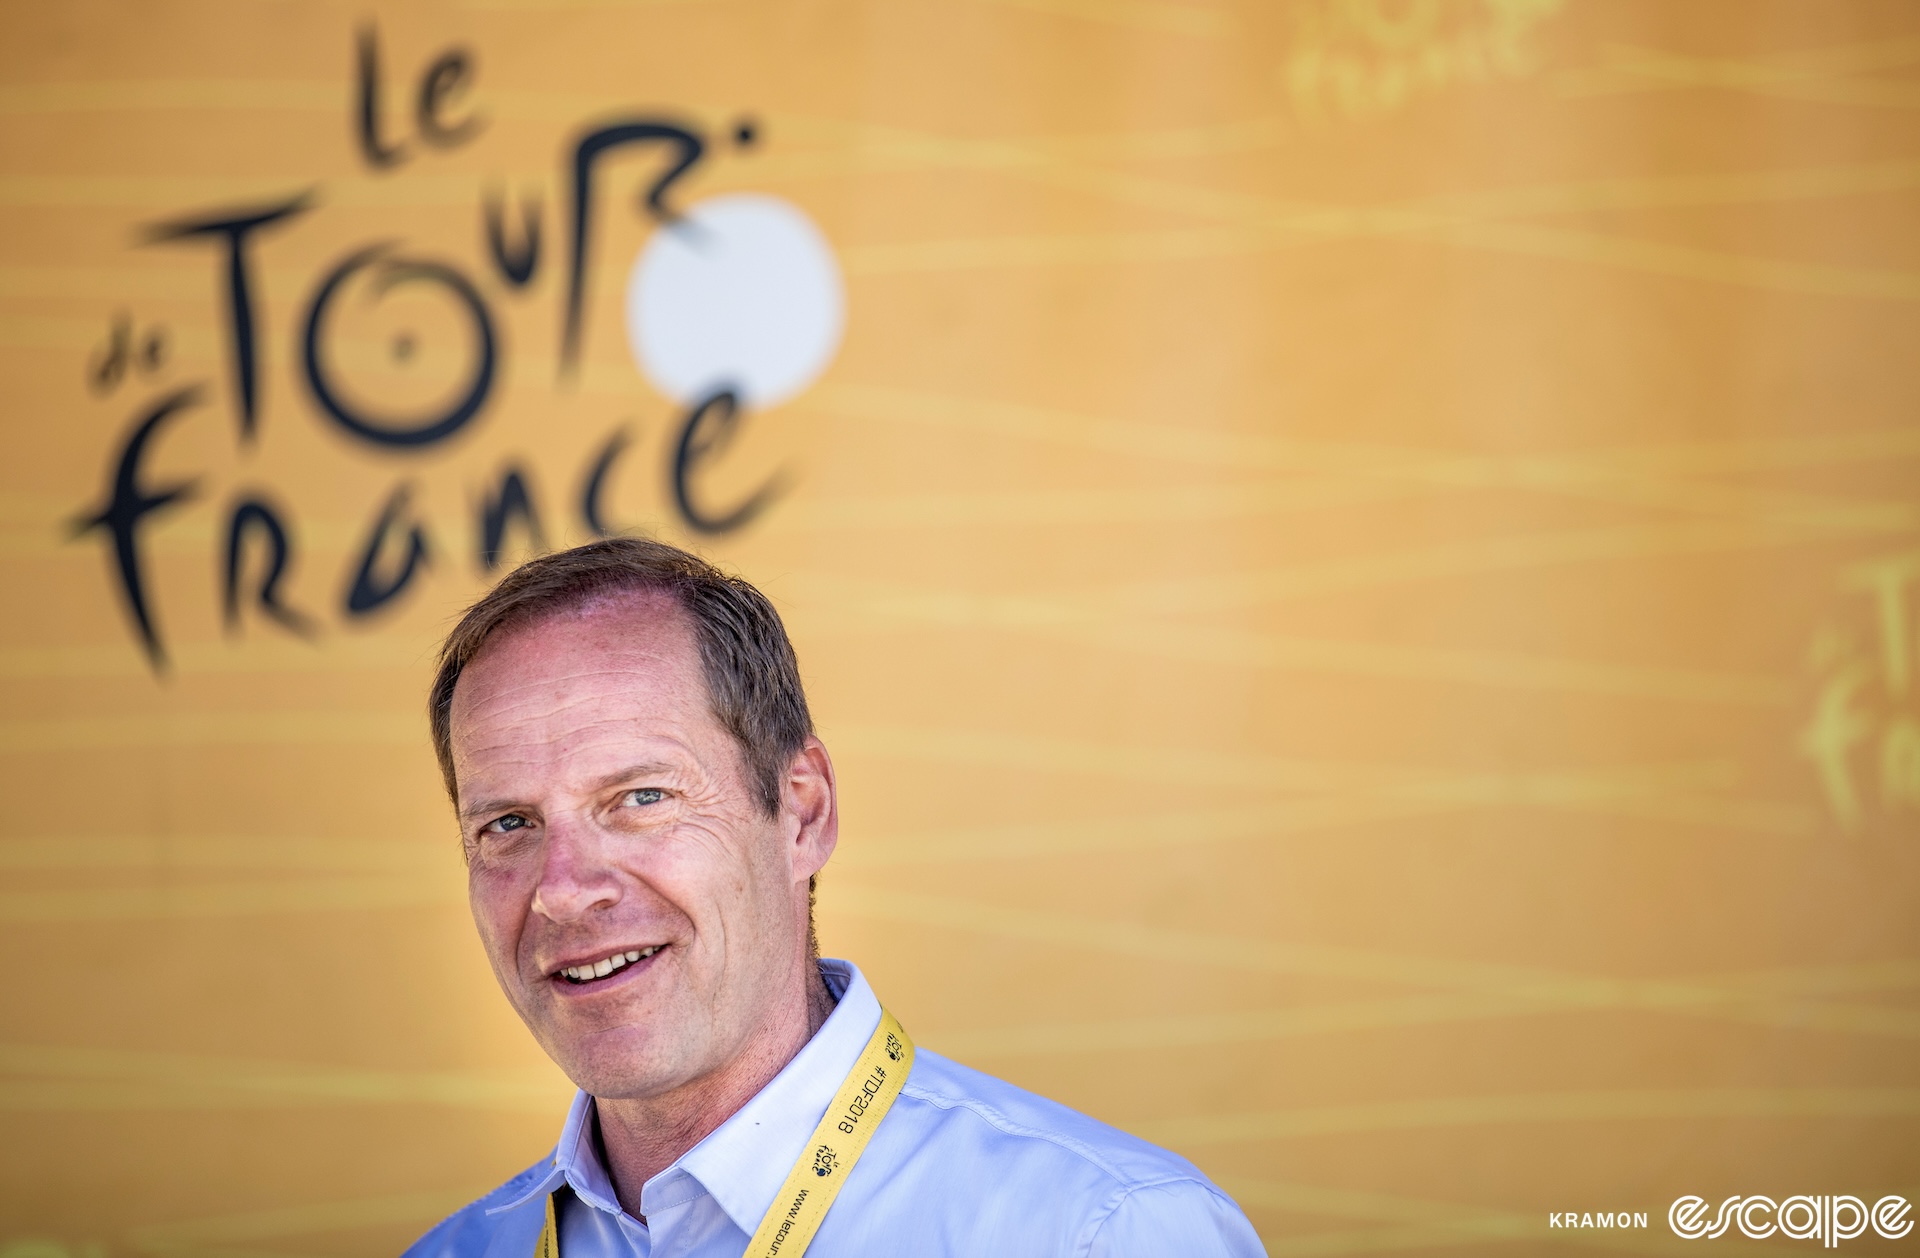 Christian Prudhomme looks at the camera with a slight smile on his face. He stands in front of a large banner with the Tour de France logo.